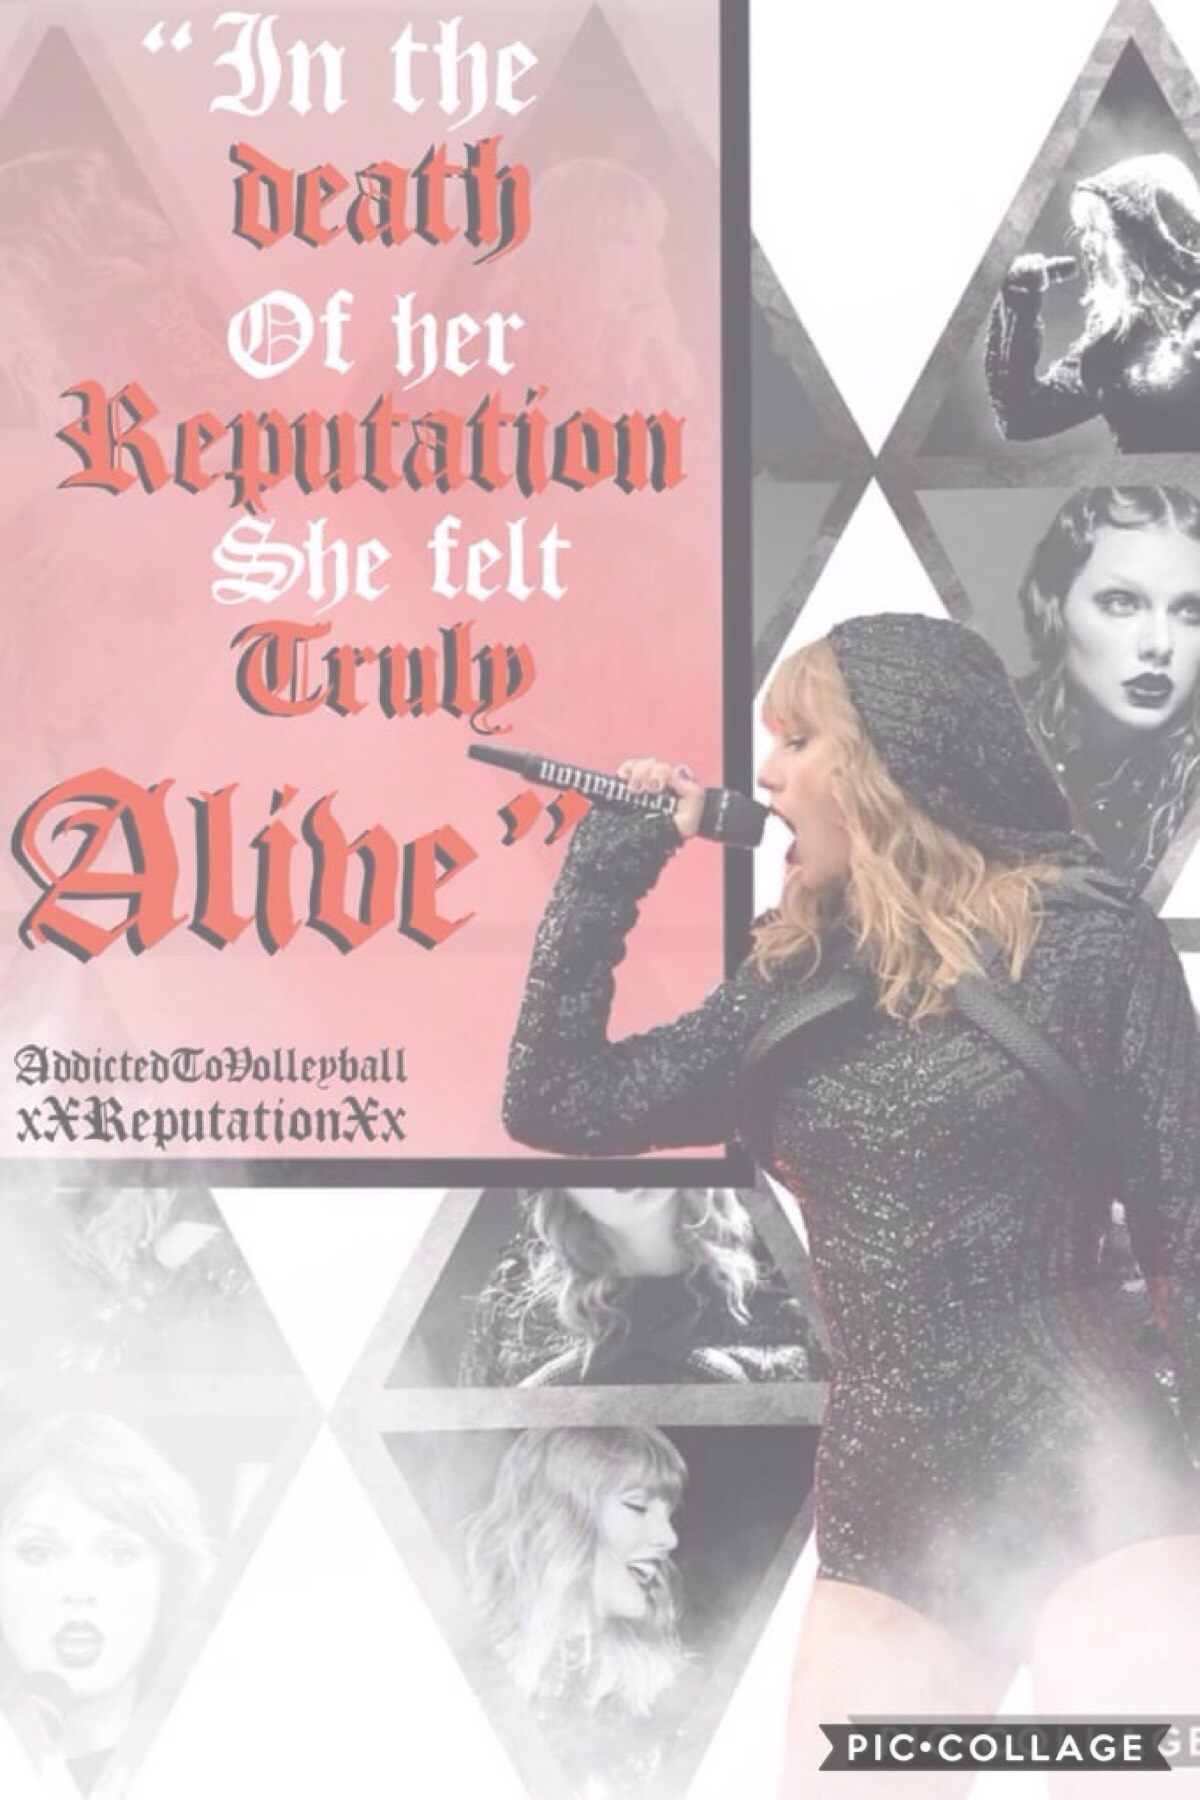 T A P
QOTD: Did you go to the Rep tour?
AOTD: Yep!!! We both went.
This is a collab we made a while ago but we thought we would post it on here for you all to see (again) 😂.

